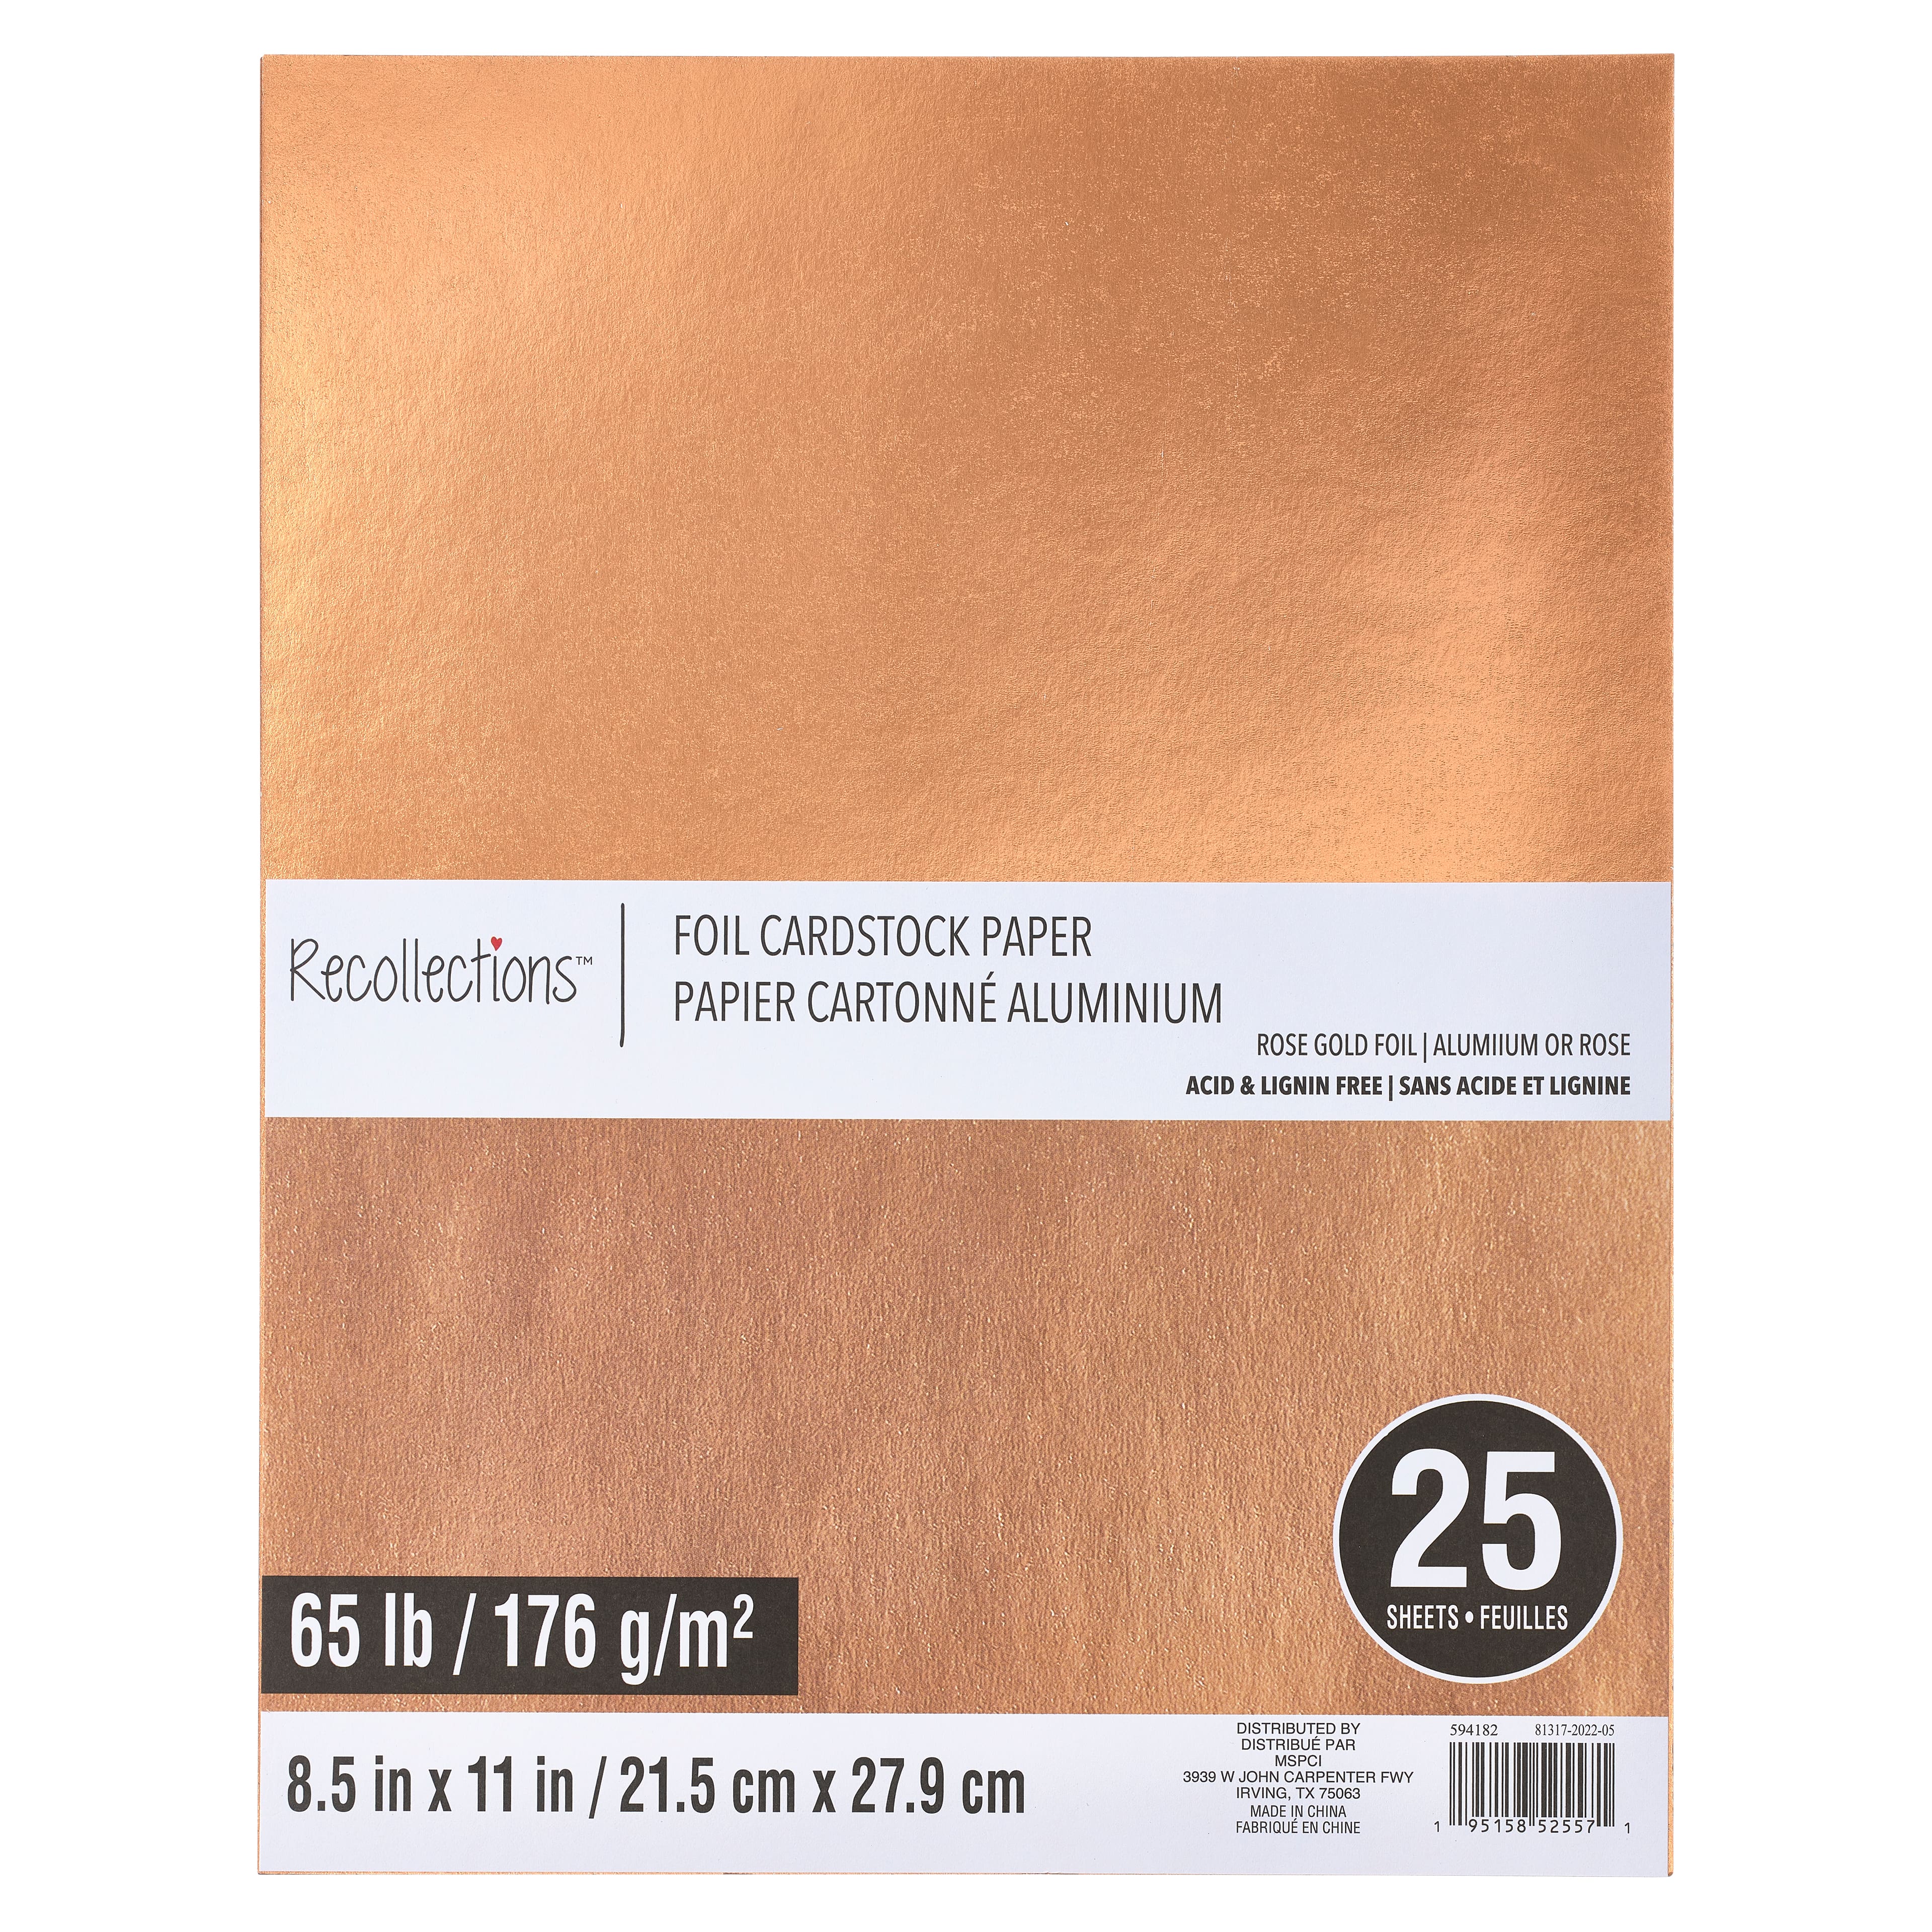 Rose Gold 8-1/2-x-11 25 per package, 300 GSM (111lb Cover) Curious